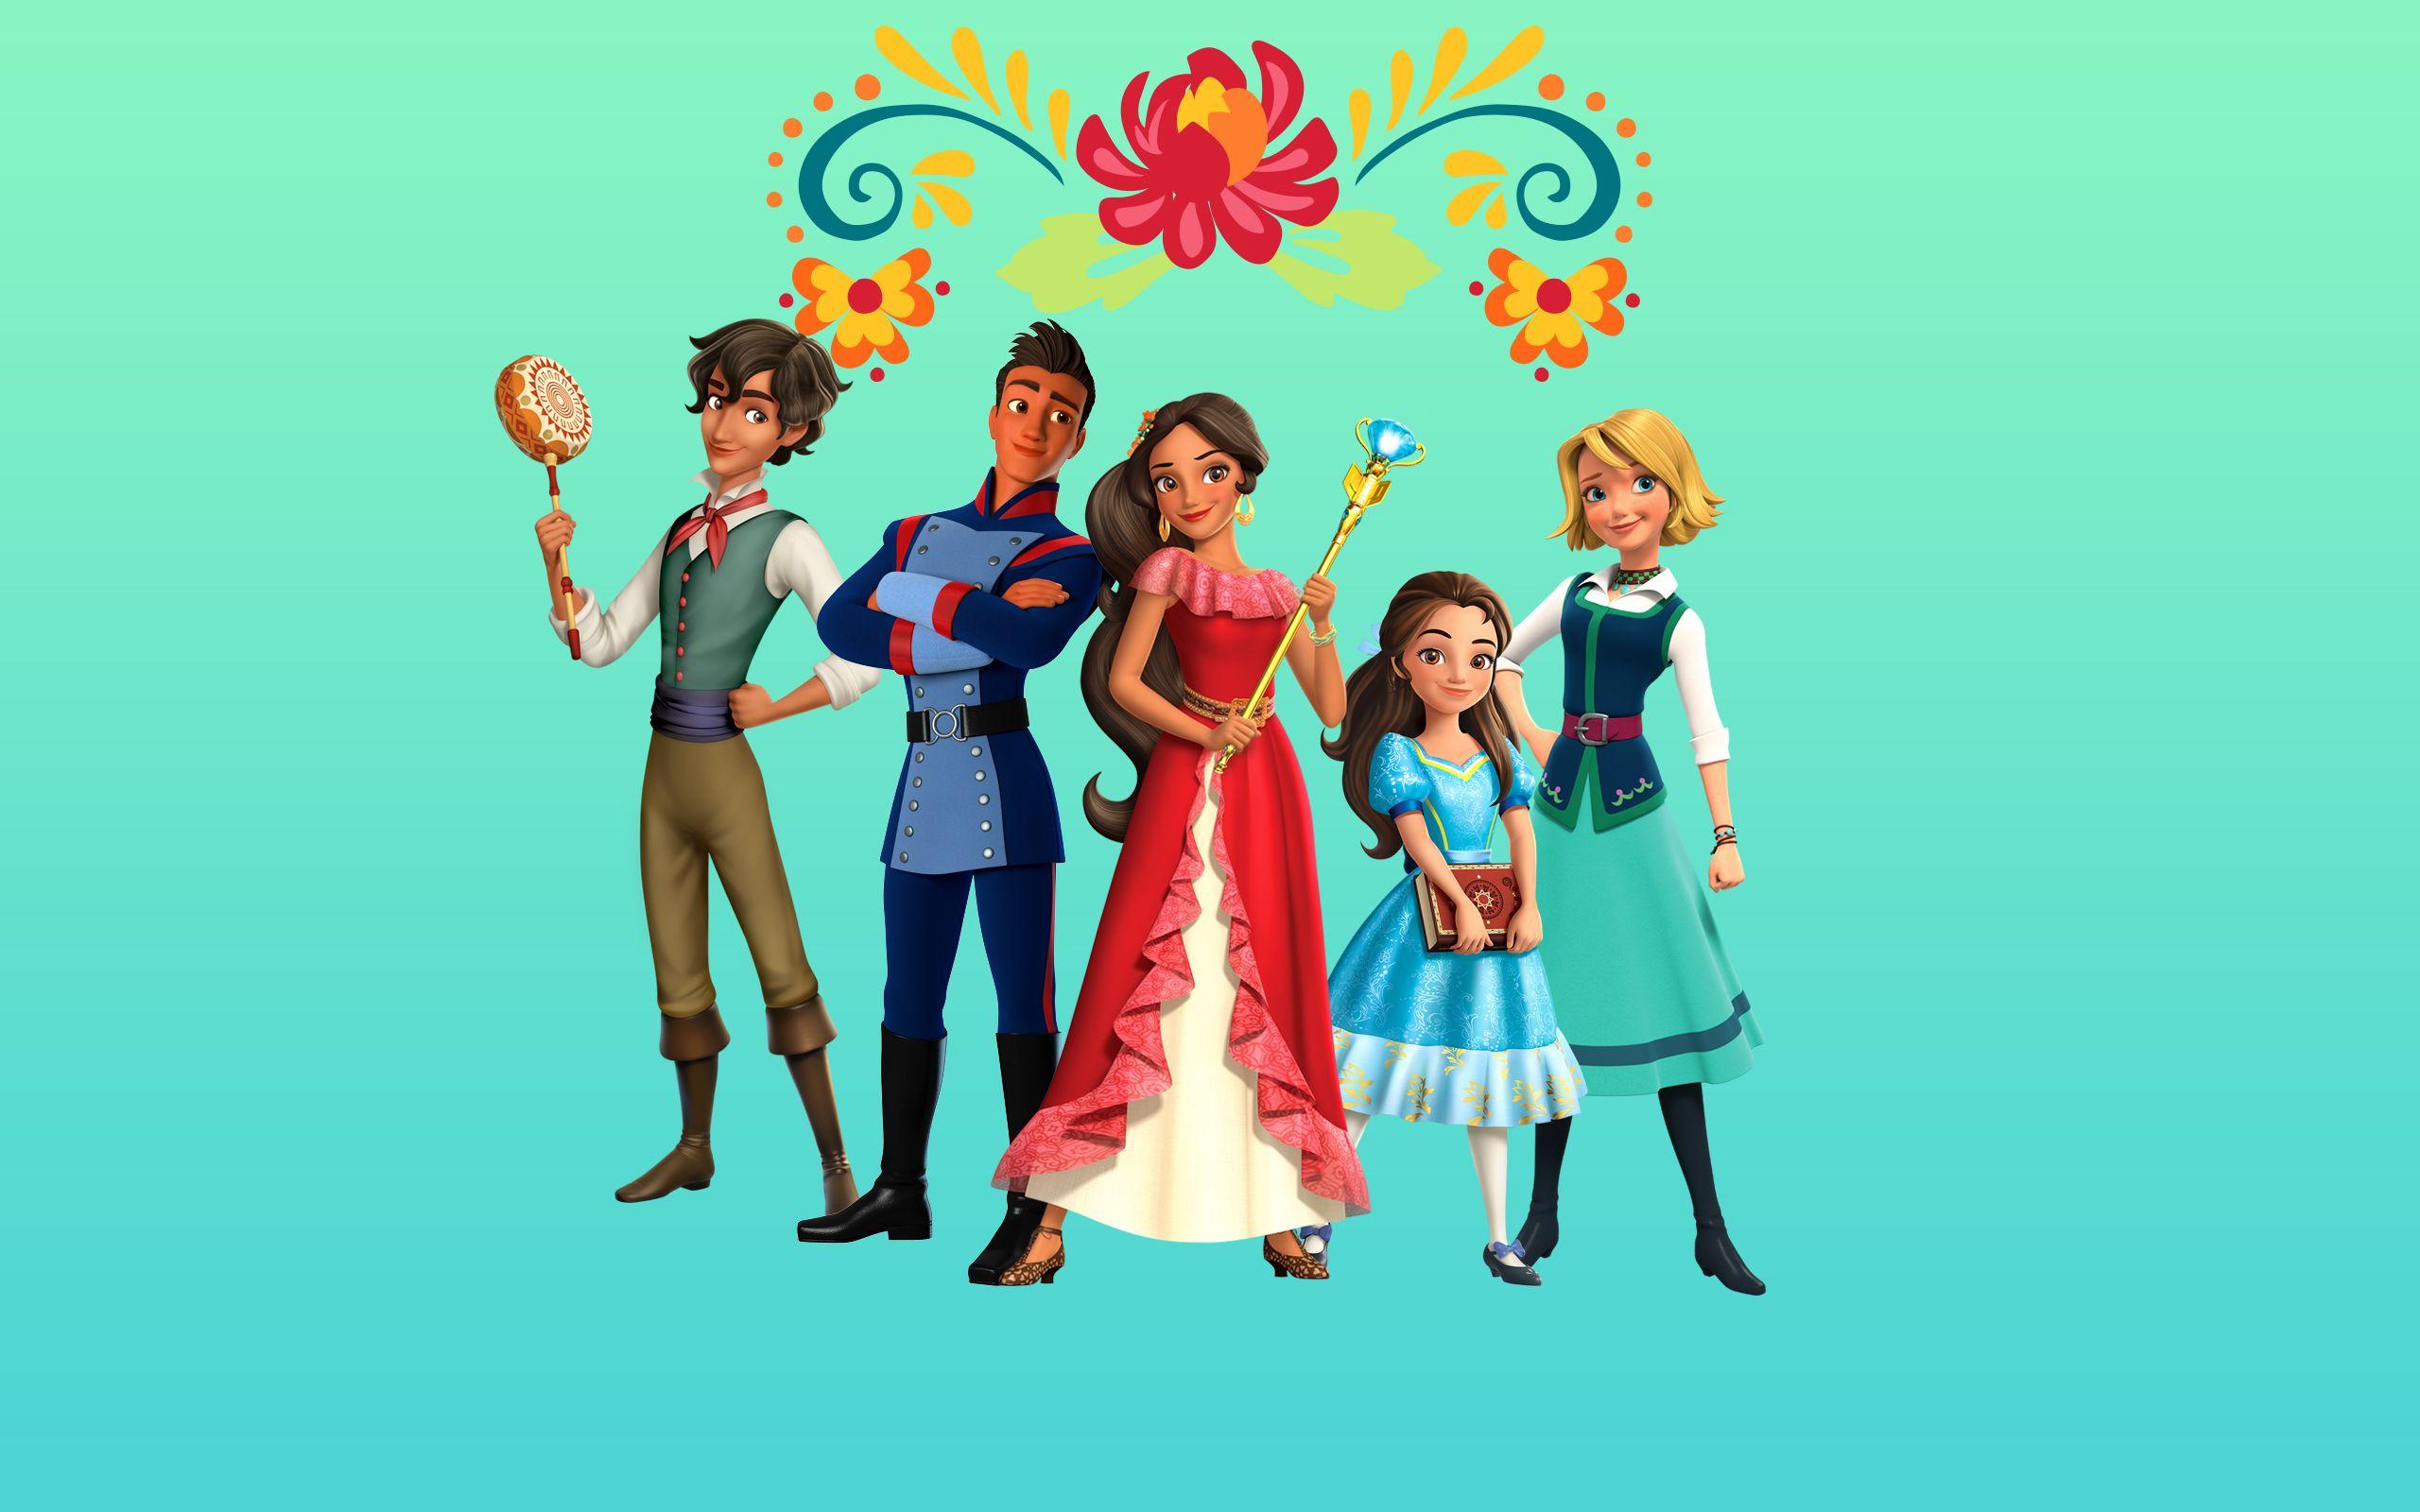 Elena of Avalor: Big wallpaper with main characters